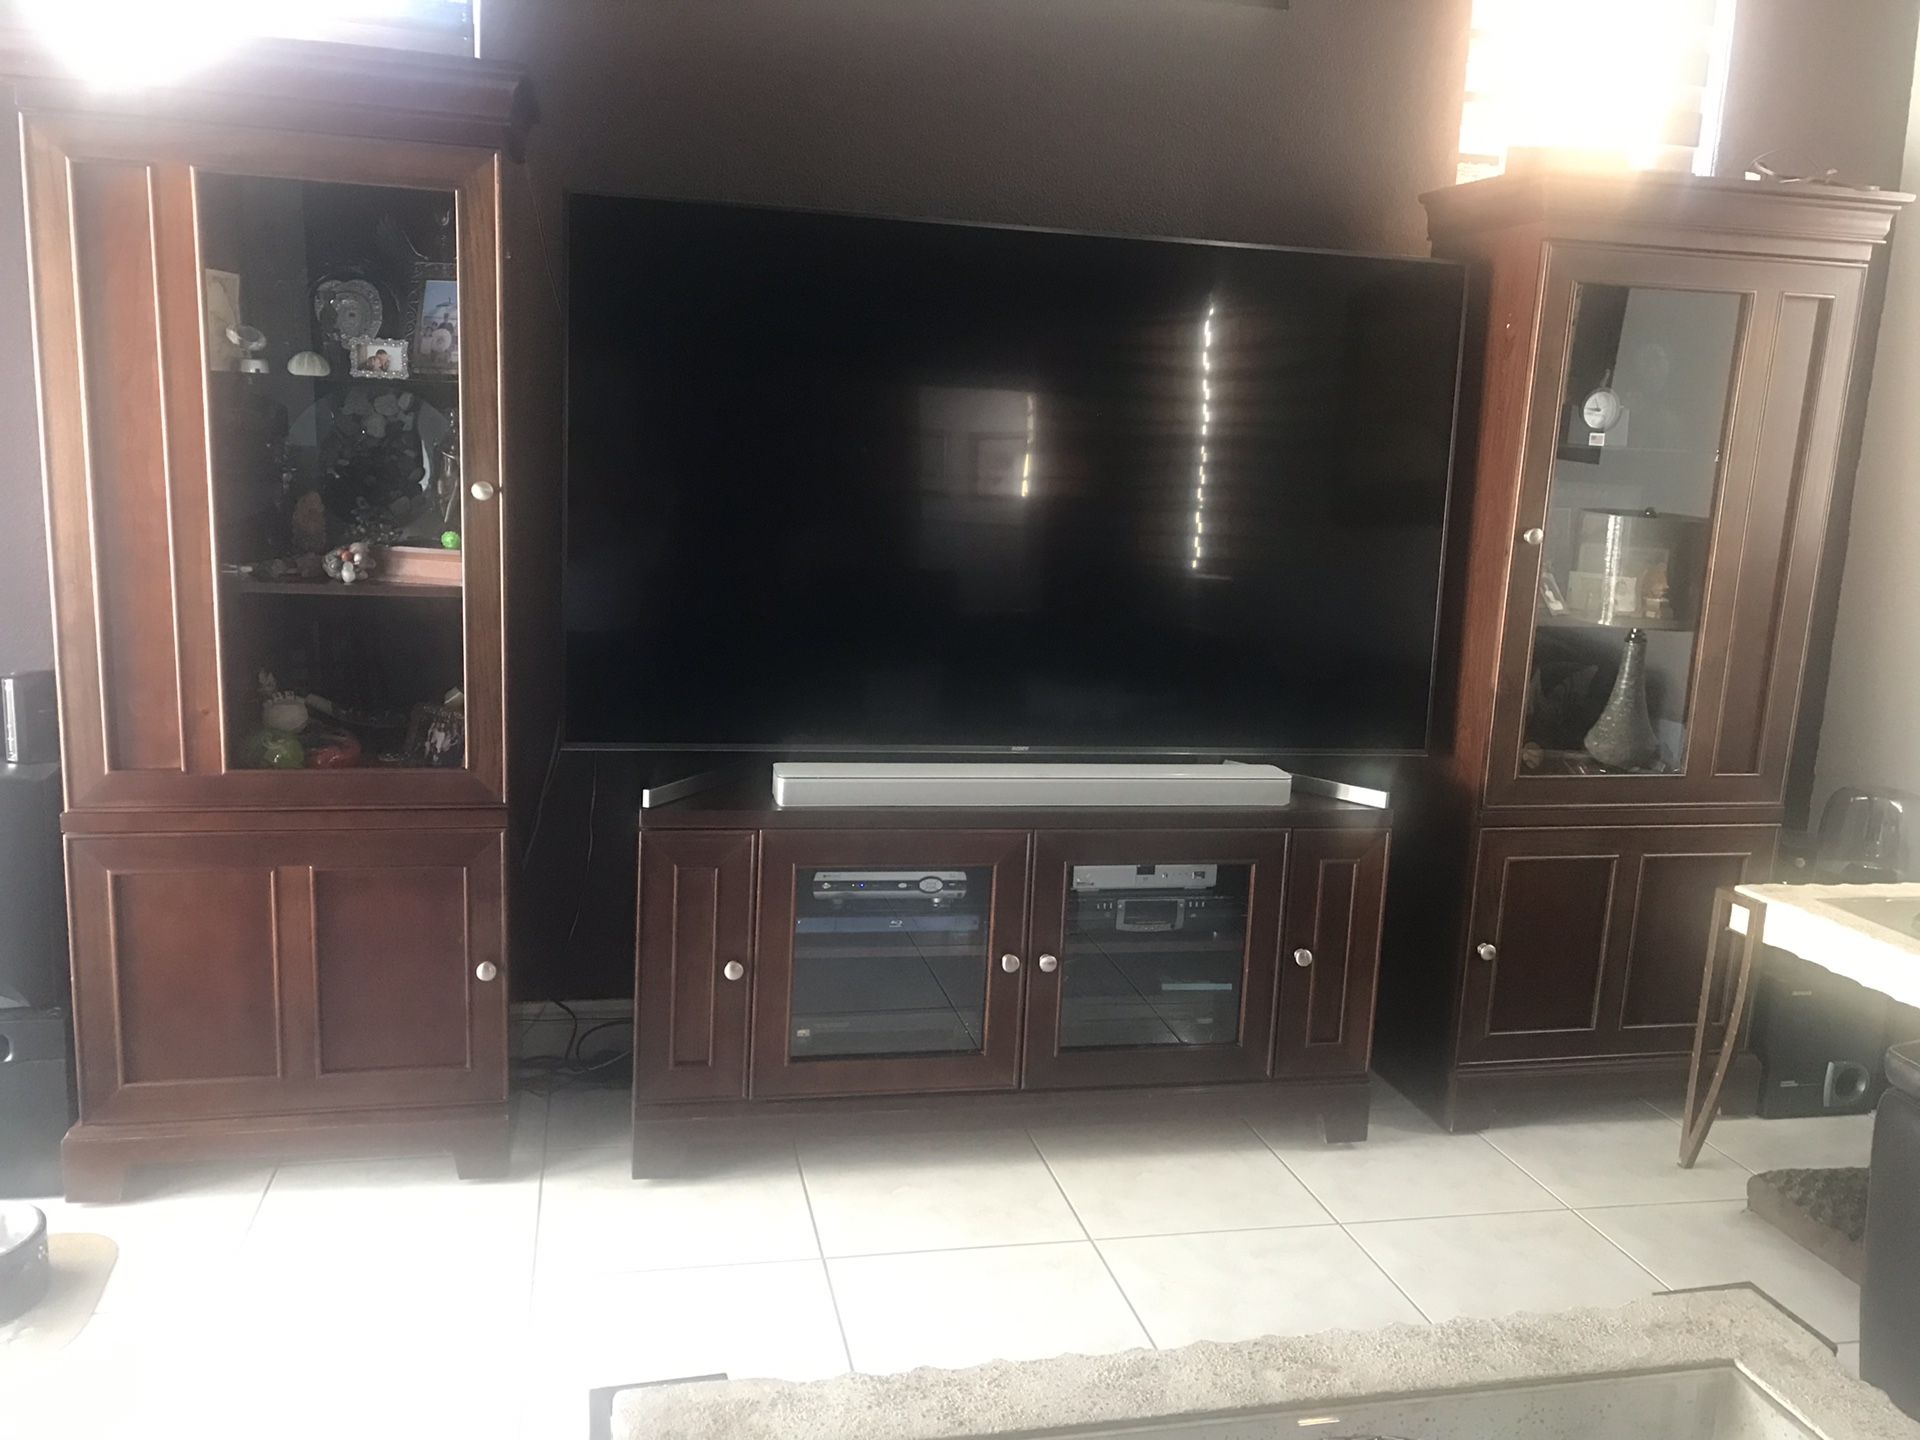 4 piece tv console in great condition. Can hold a tv up to 65” inches. With plenty of storage and display.